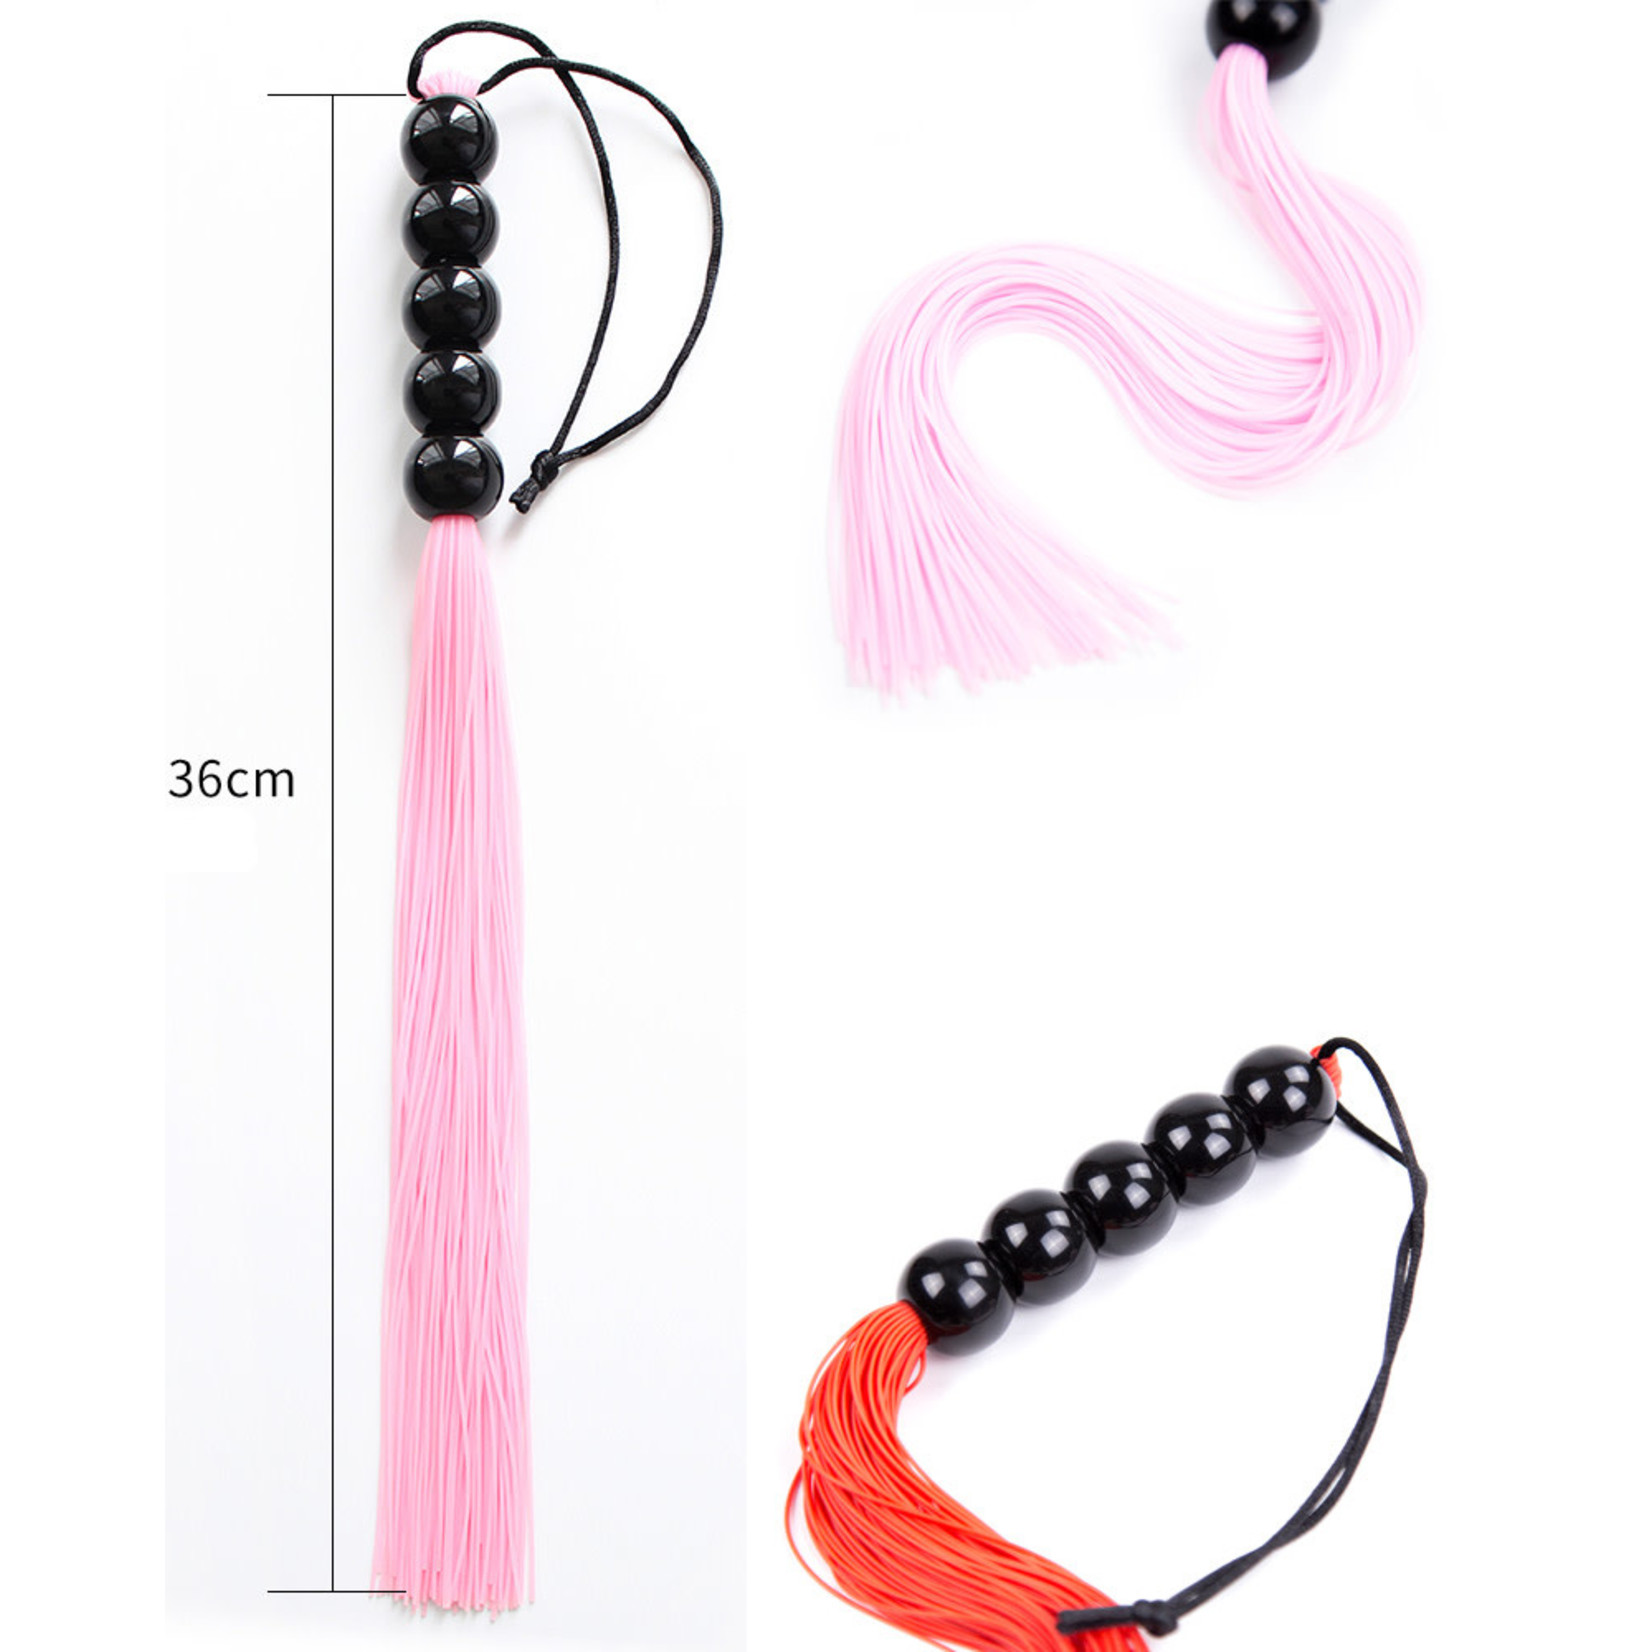 SILICONE WHIP WITH BEAD HANDLE PURPLE